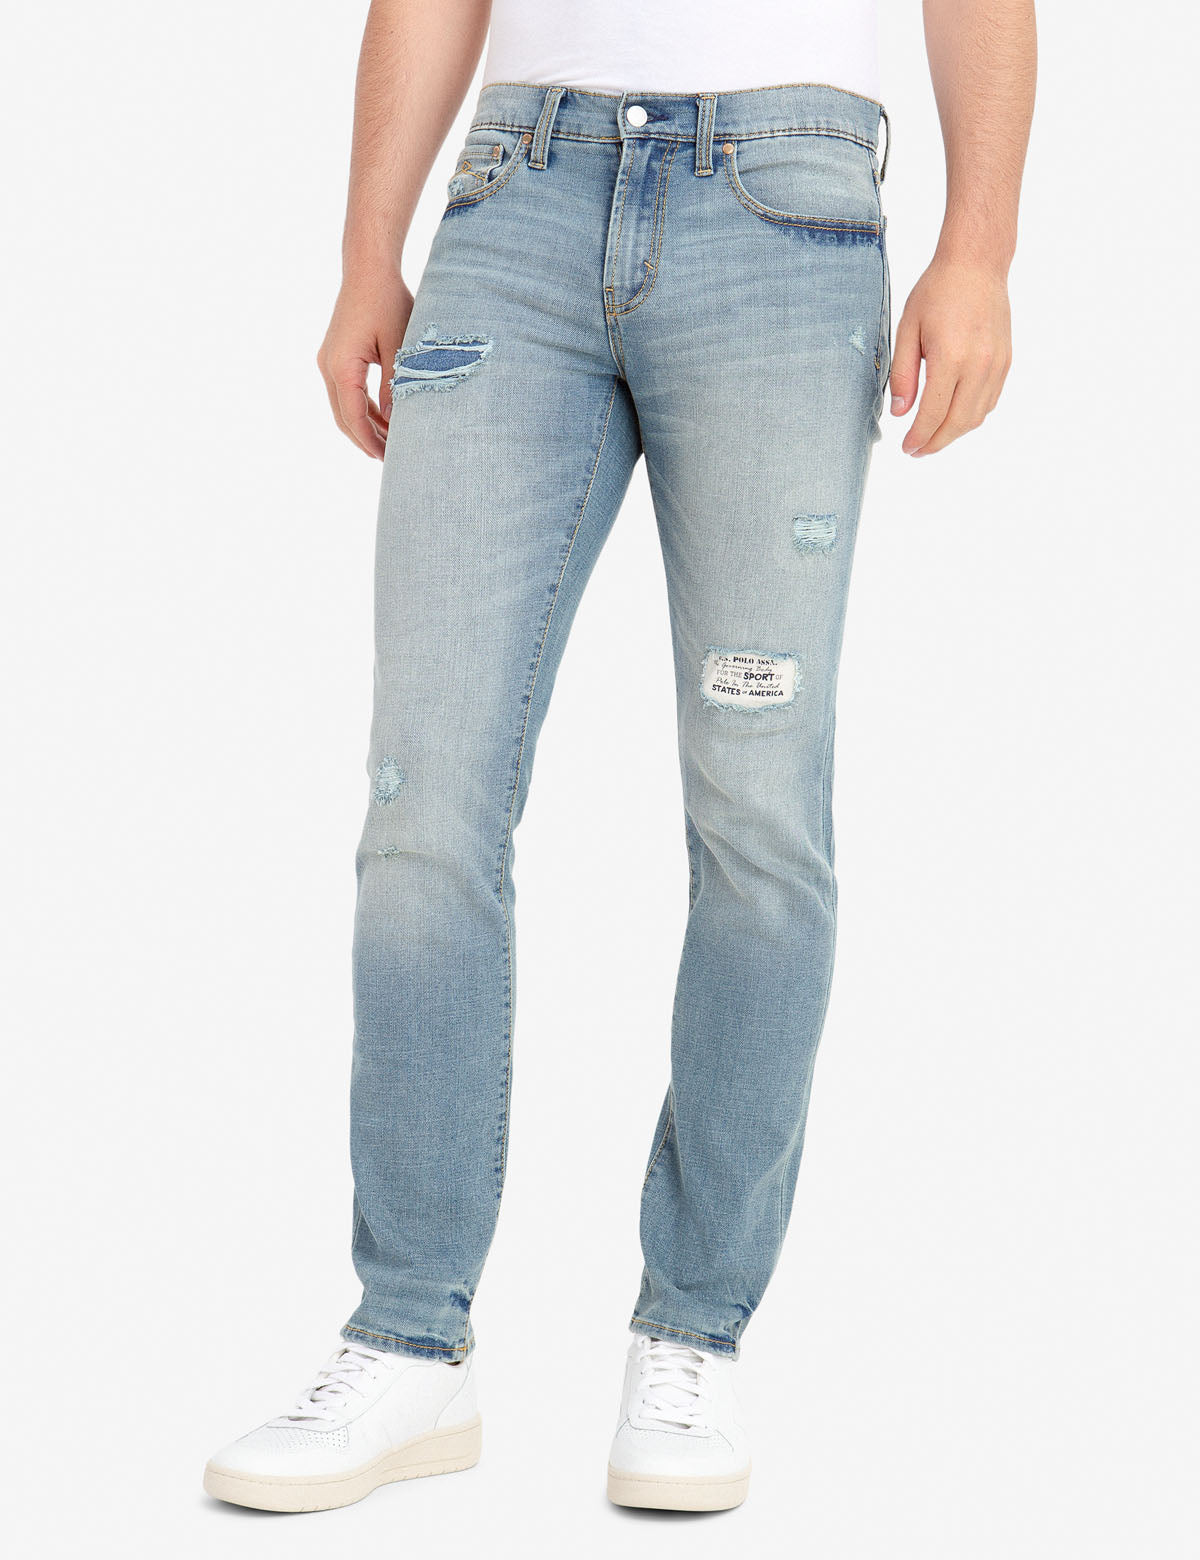 REPREVE® SKINNY FIT DISTRESSED JEANS 